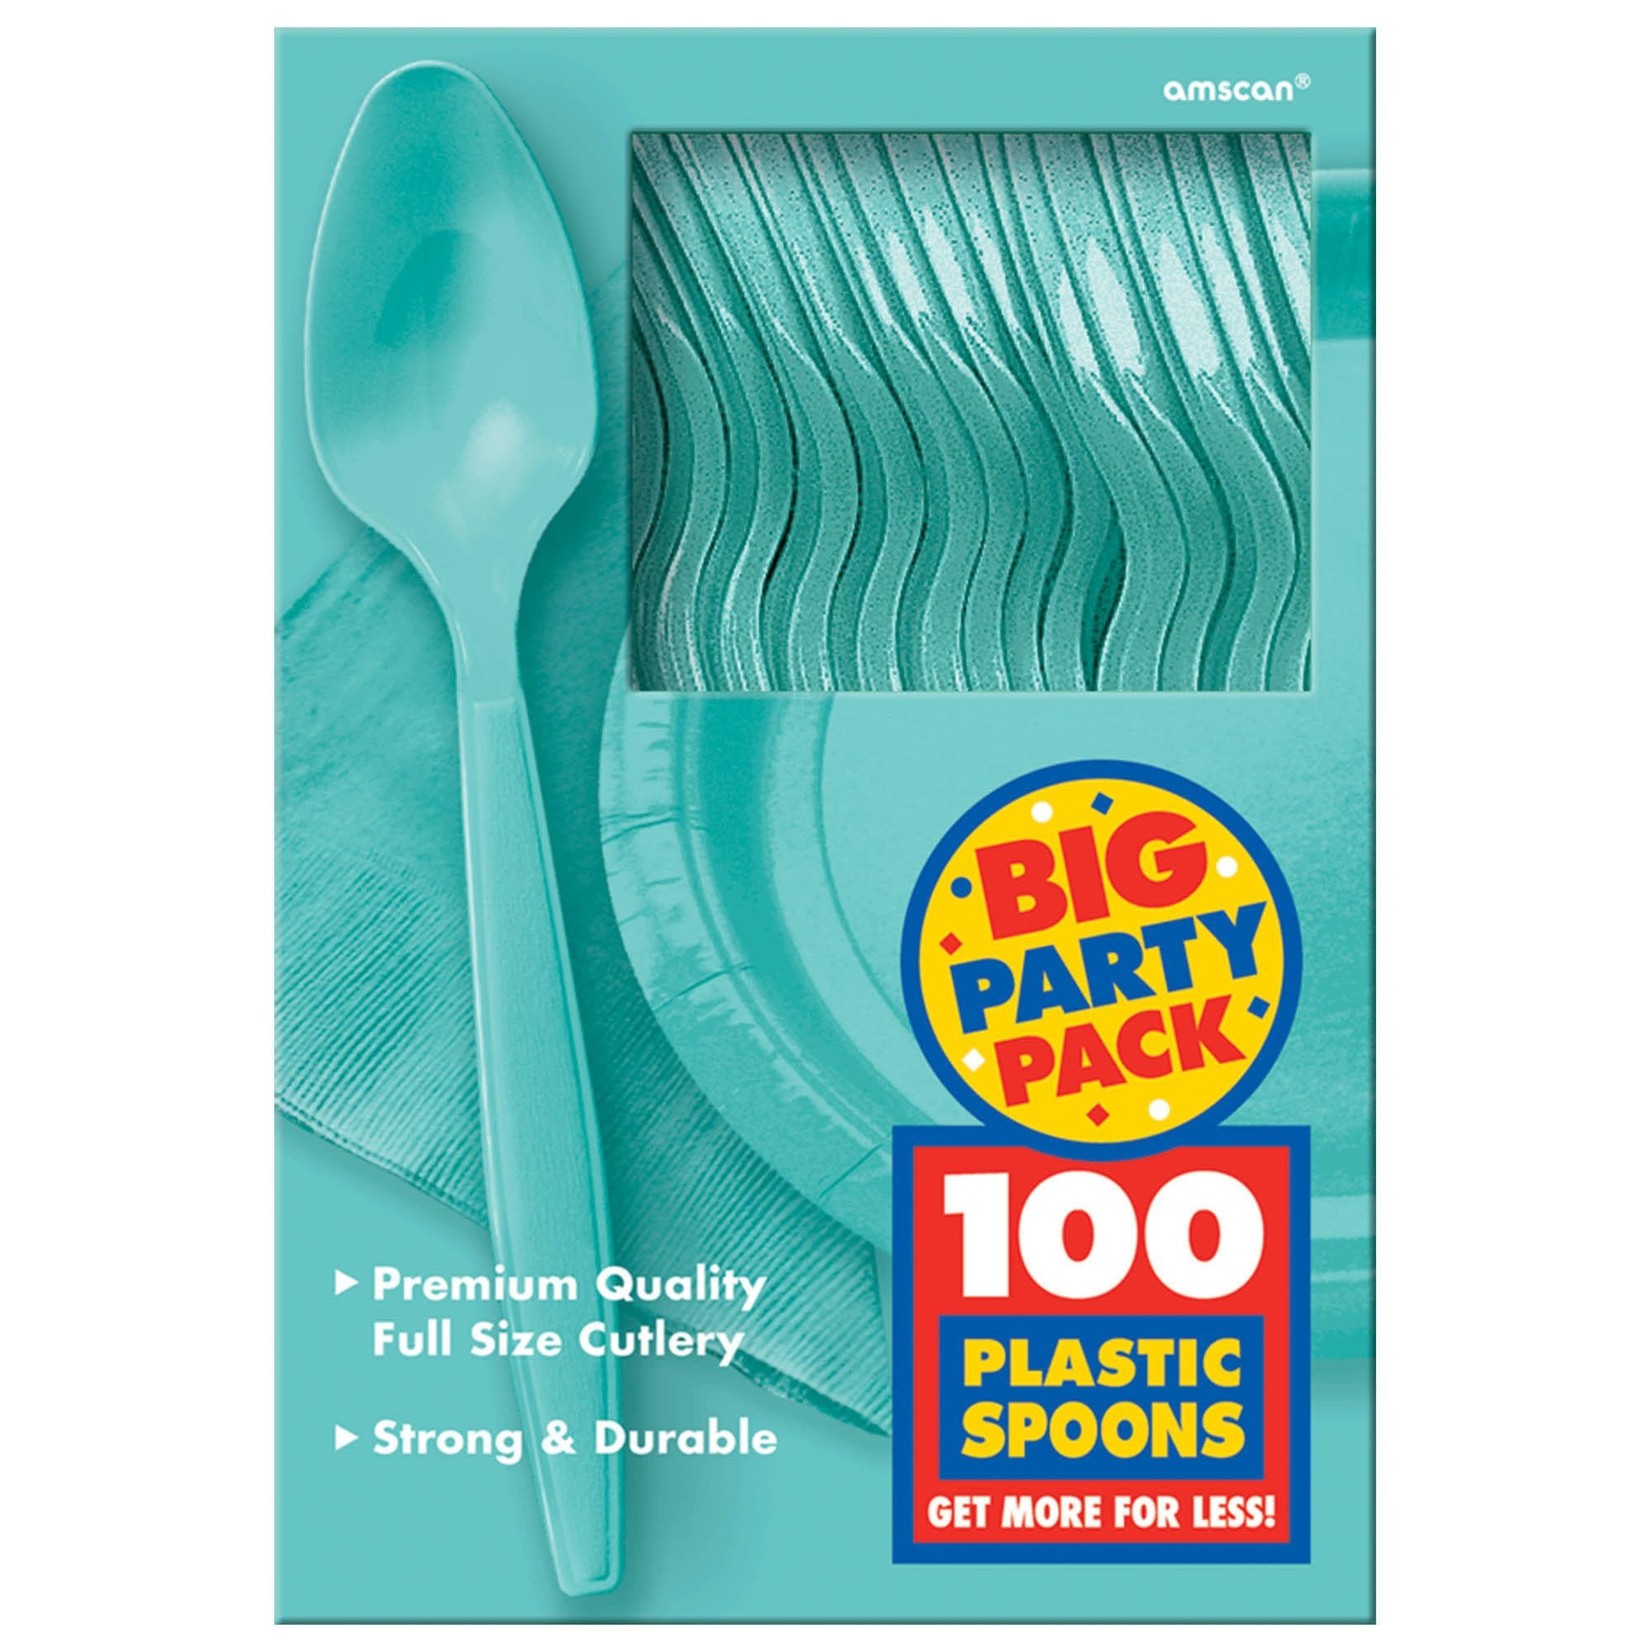 Big Party Pack Plastic Spoons - Robin's Egg Blue